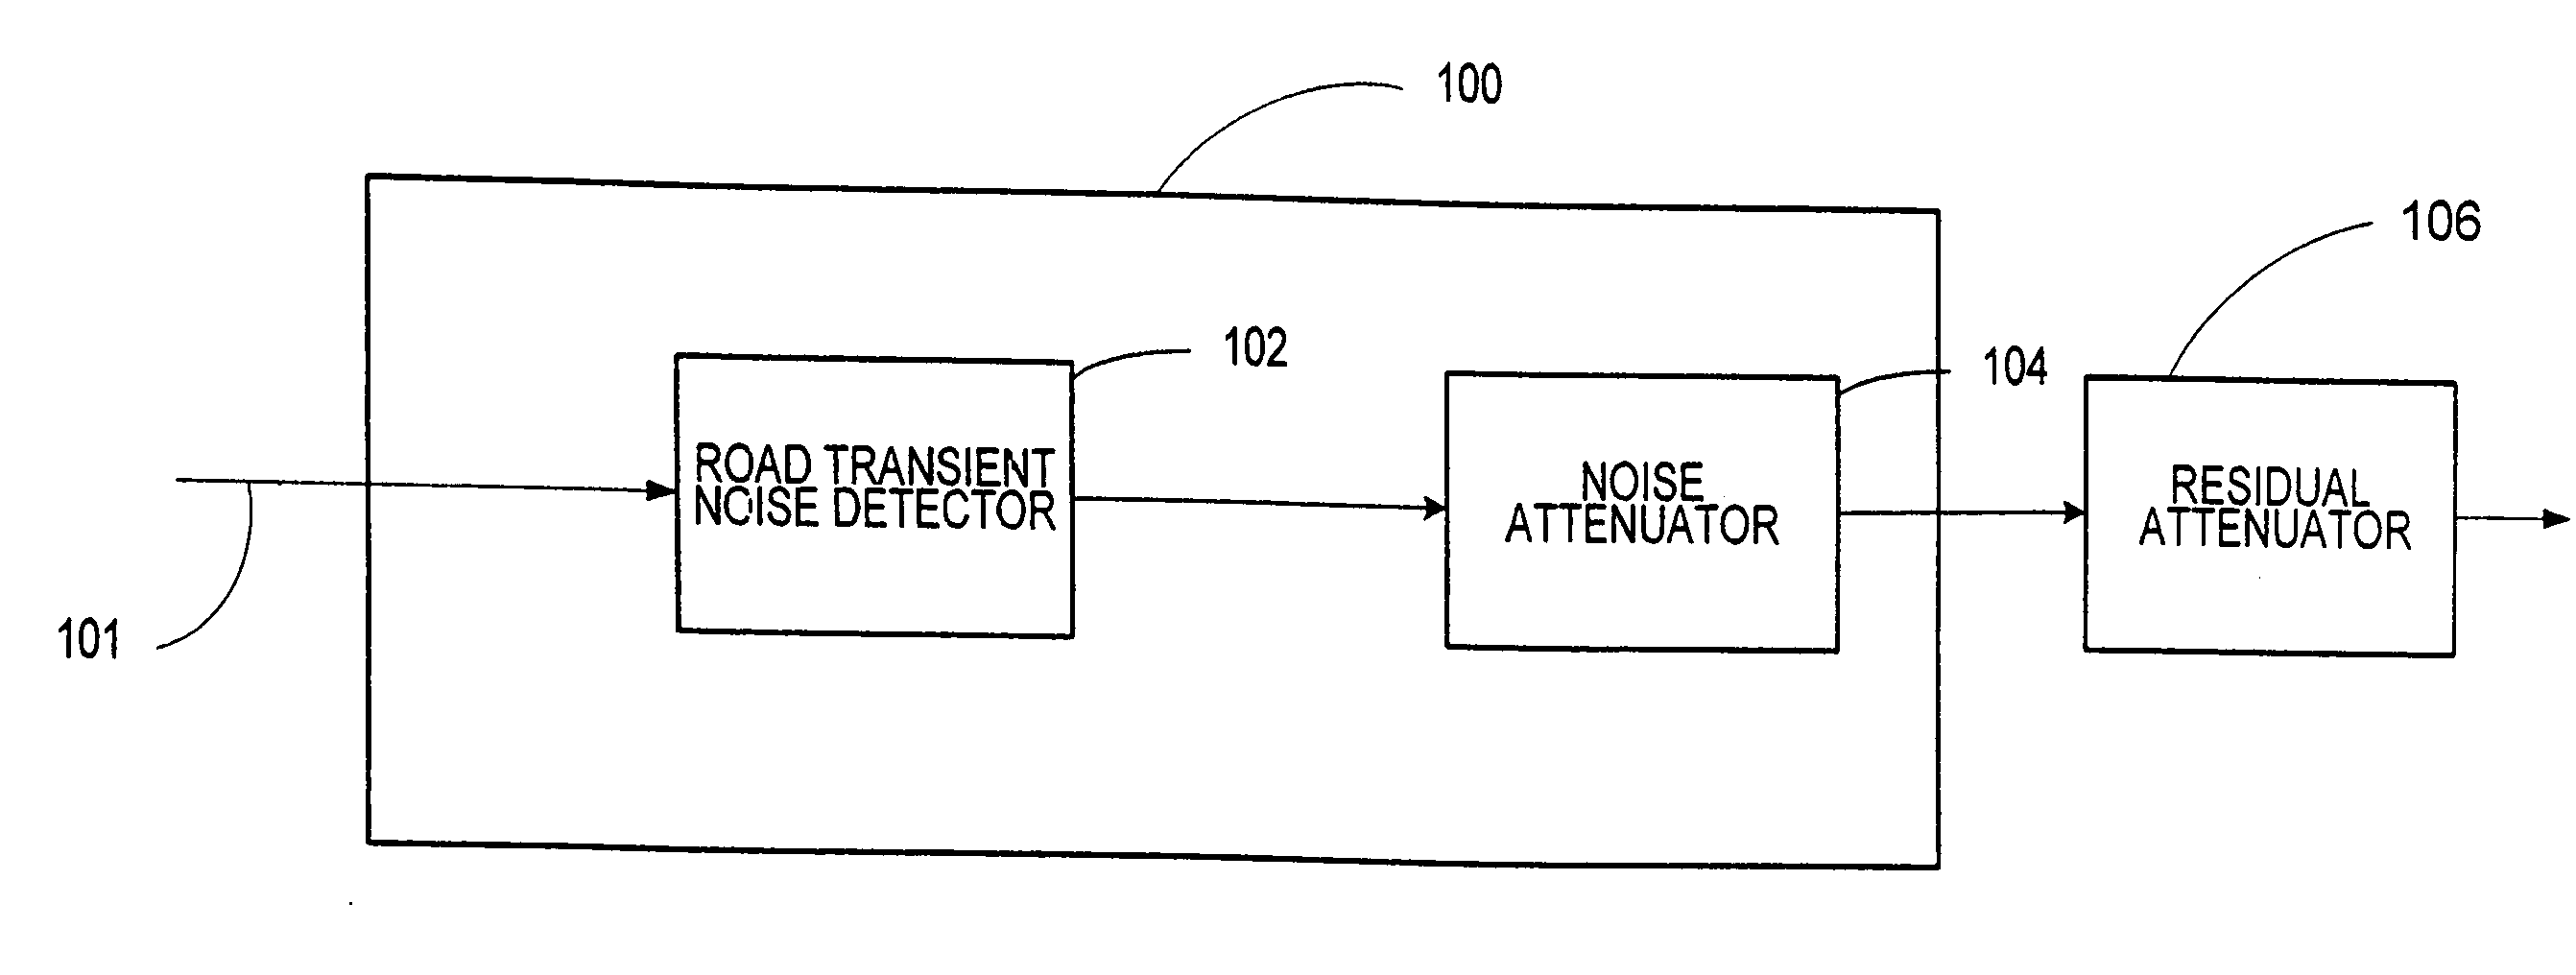 Minimization of transient noises in a voice signal